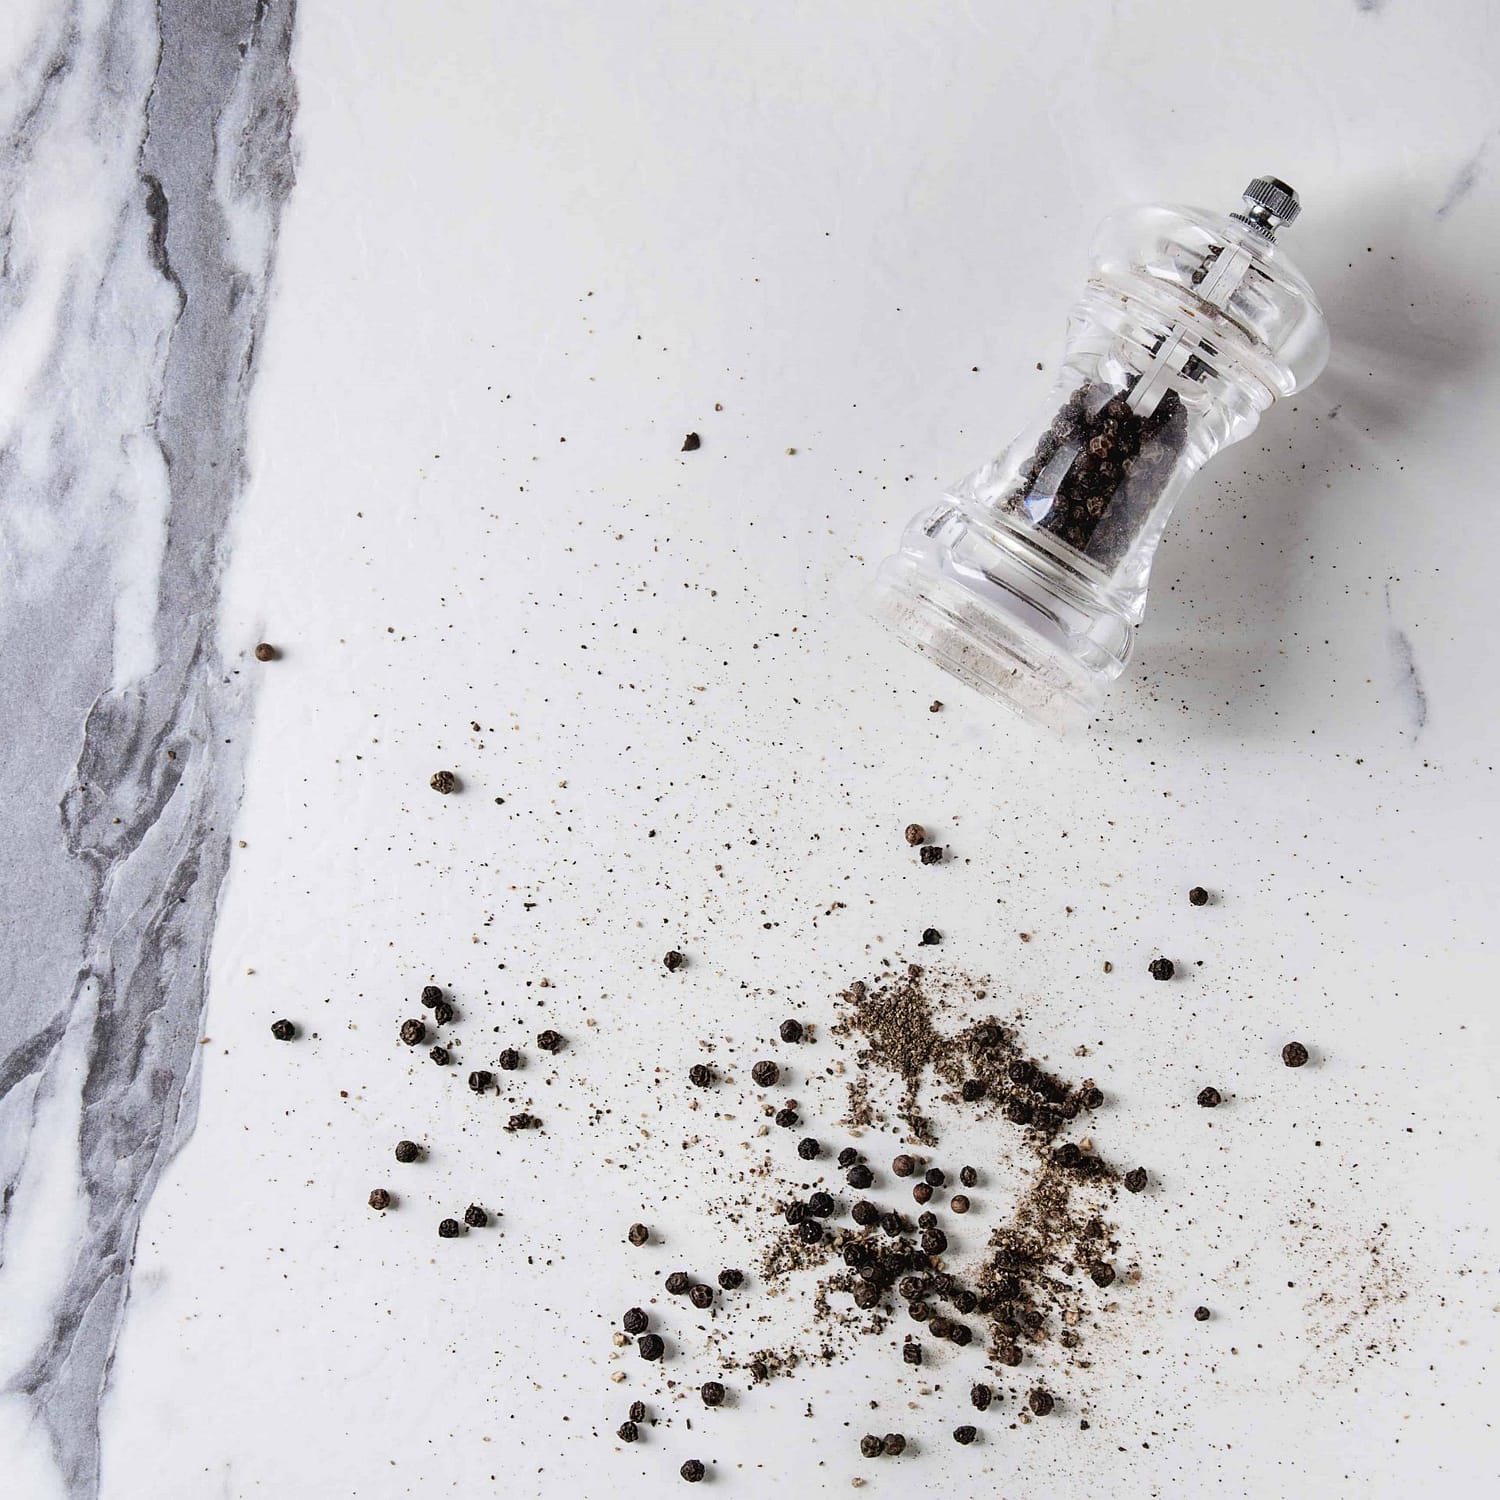 Black peppers peppercorns and ground powder from transparent pepper mill over white marble 